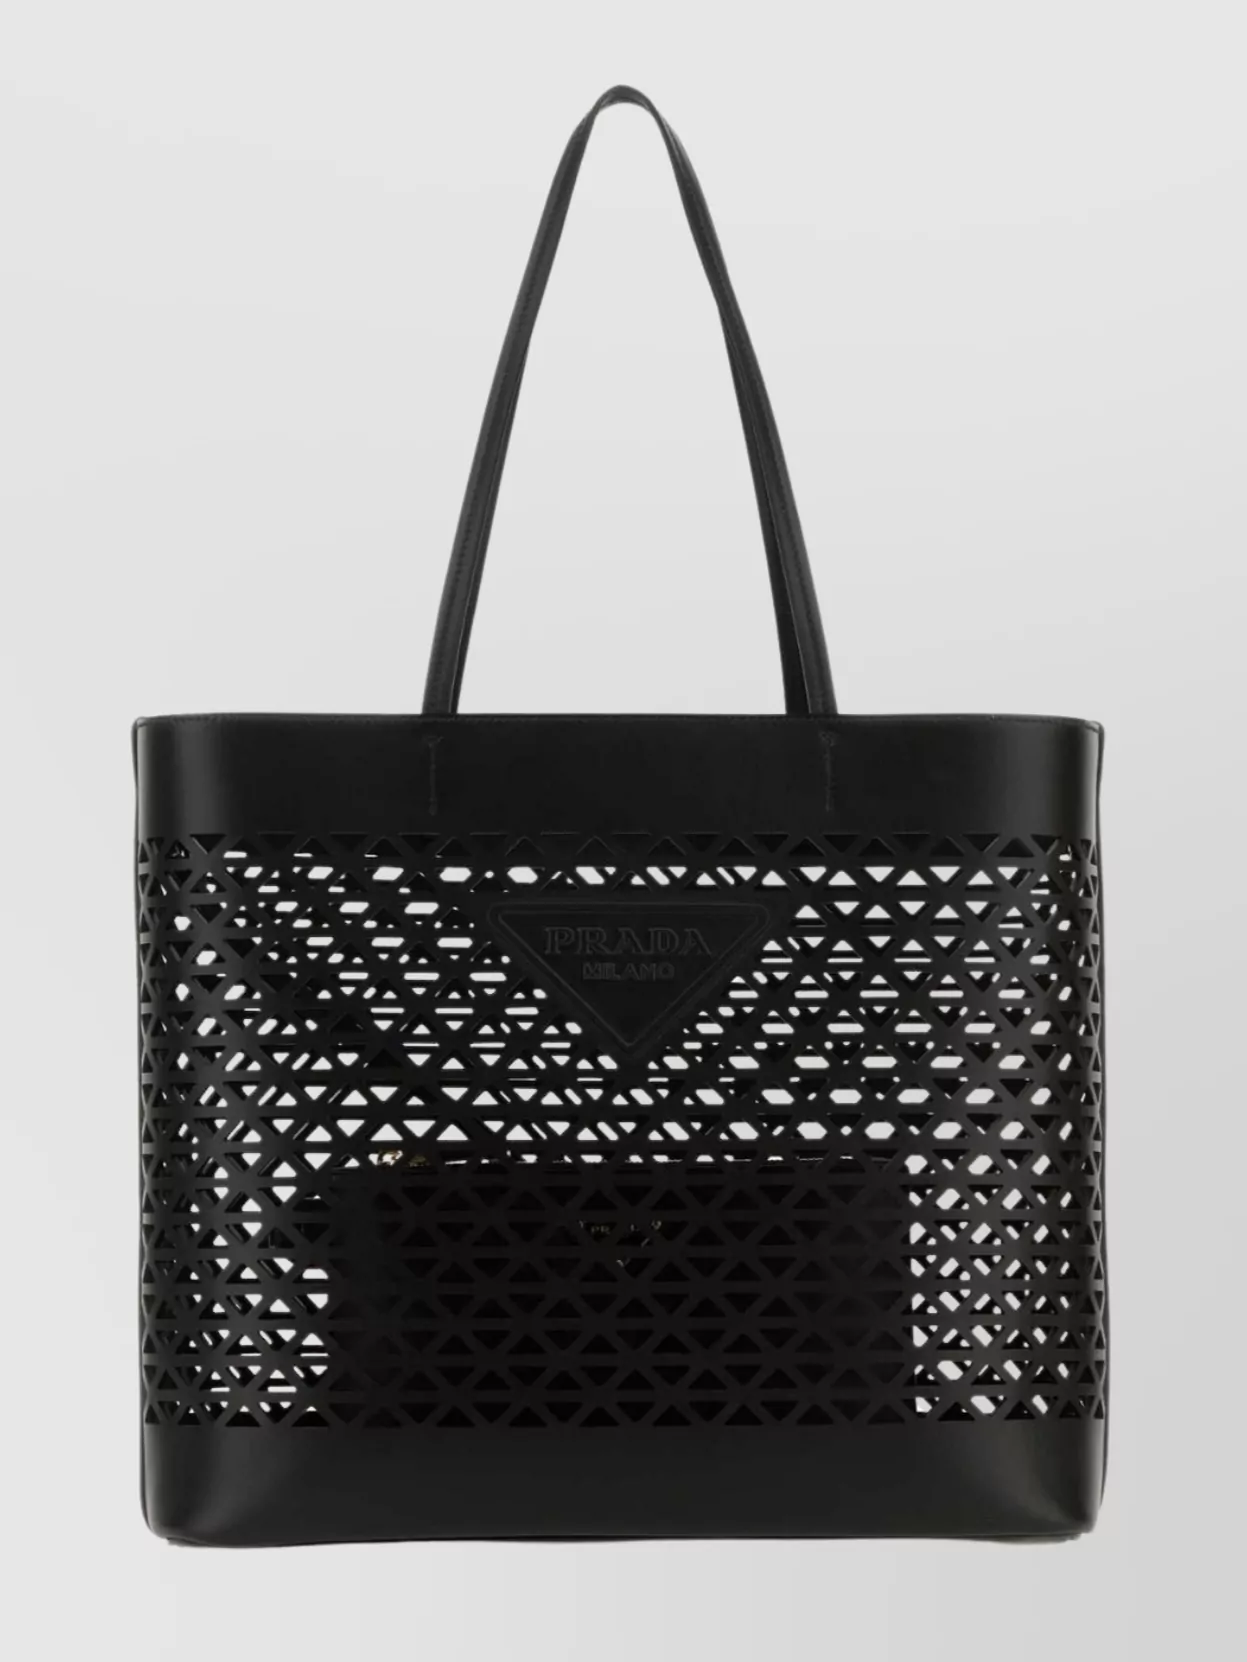 Shop Prada Leather Tote Bag Featuring Cut-out Detailing